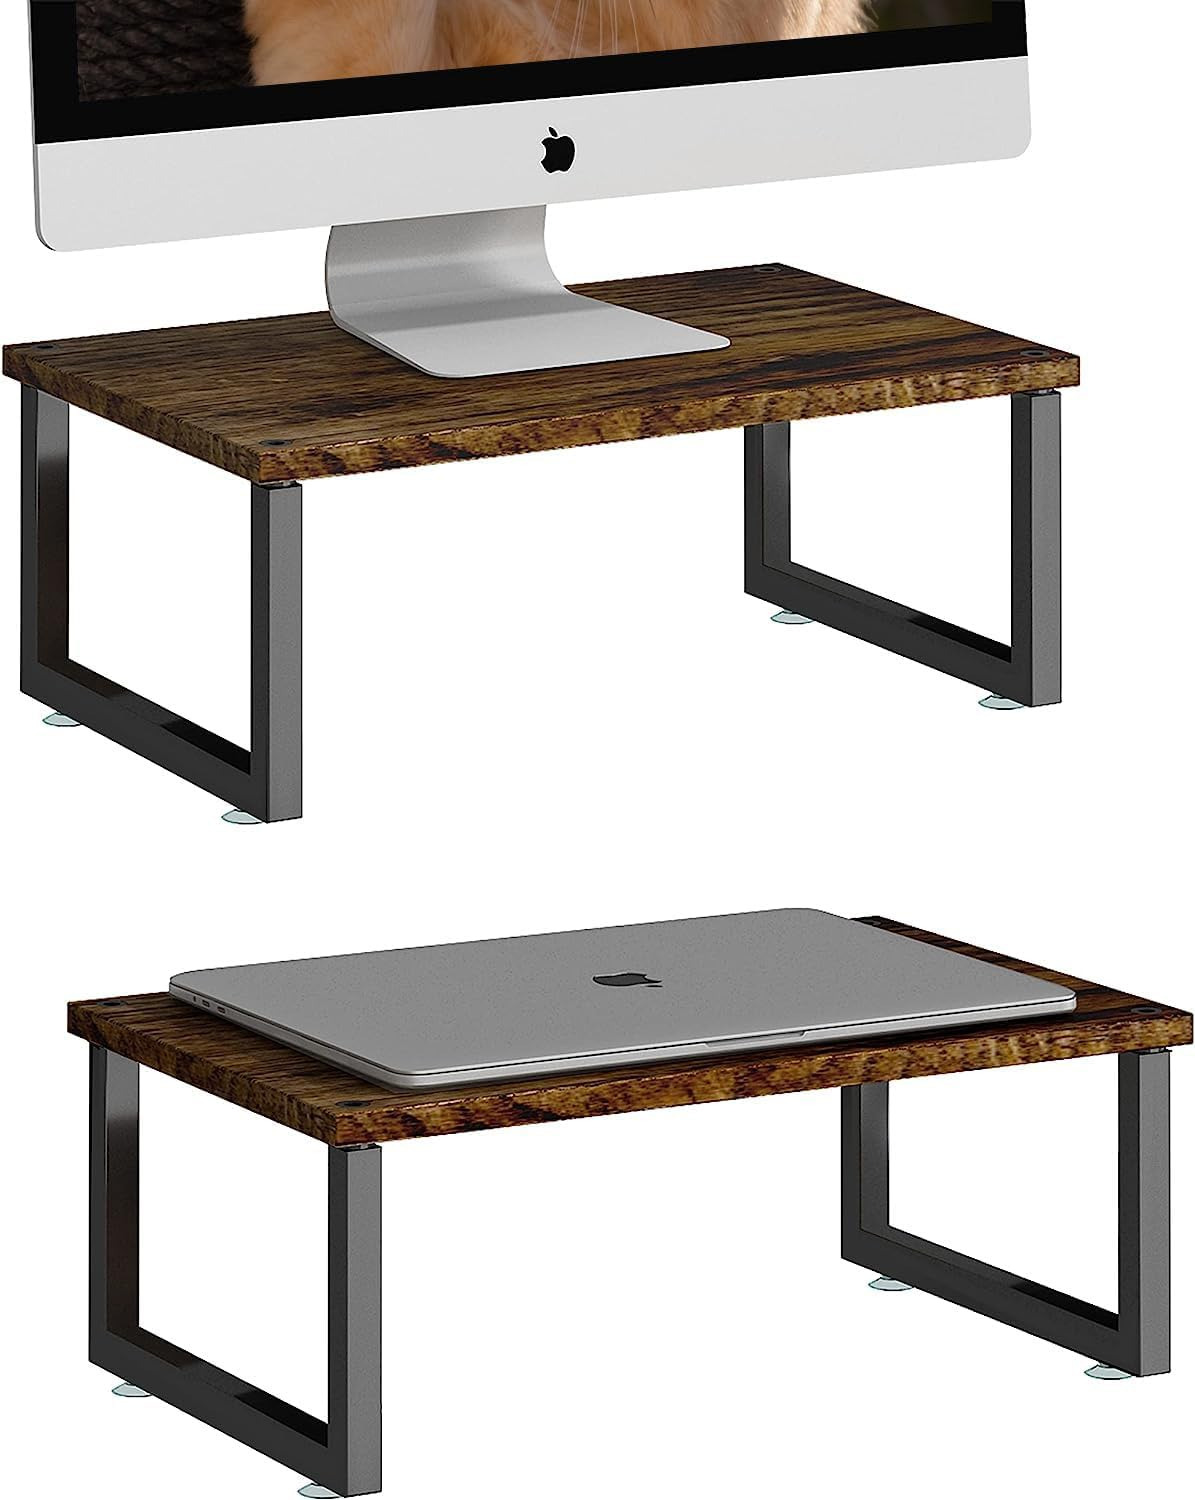 2 Pack Monitor Stand Riser, Wood Desk Storage Organizer for Office Laptop, Compu